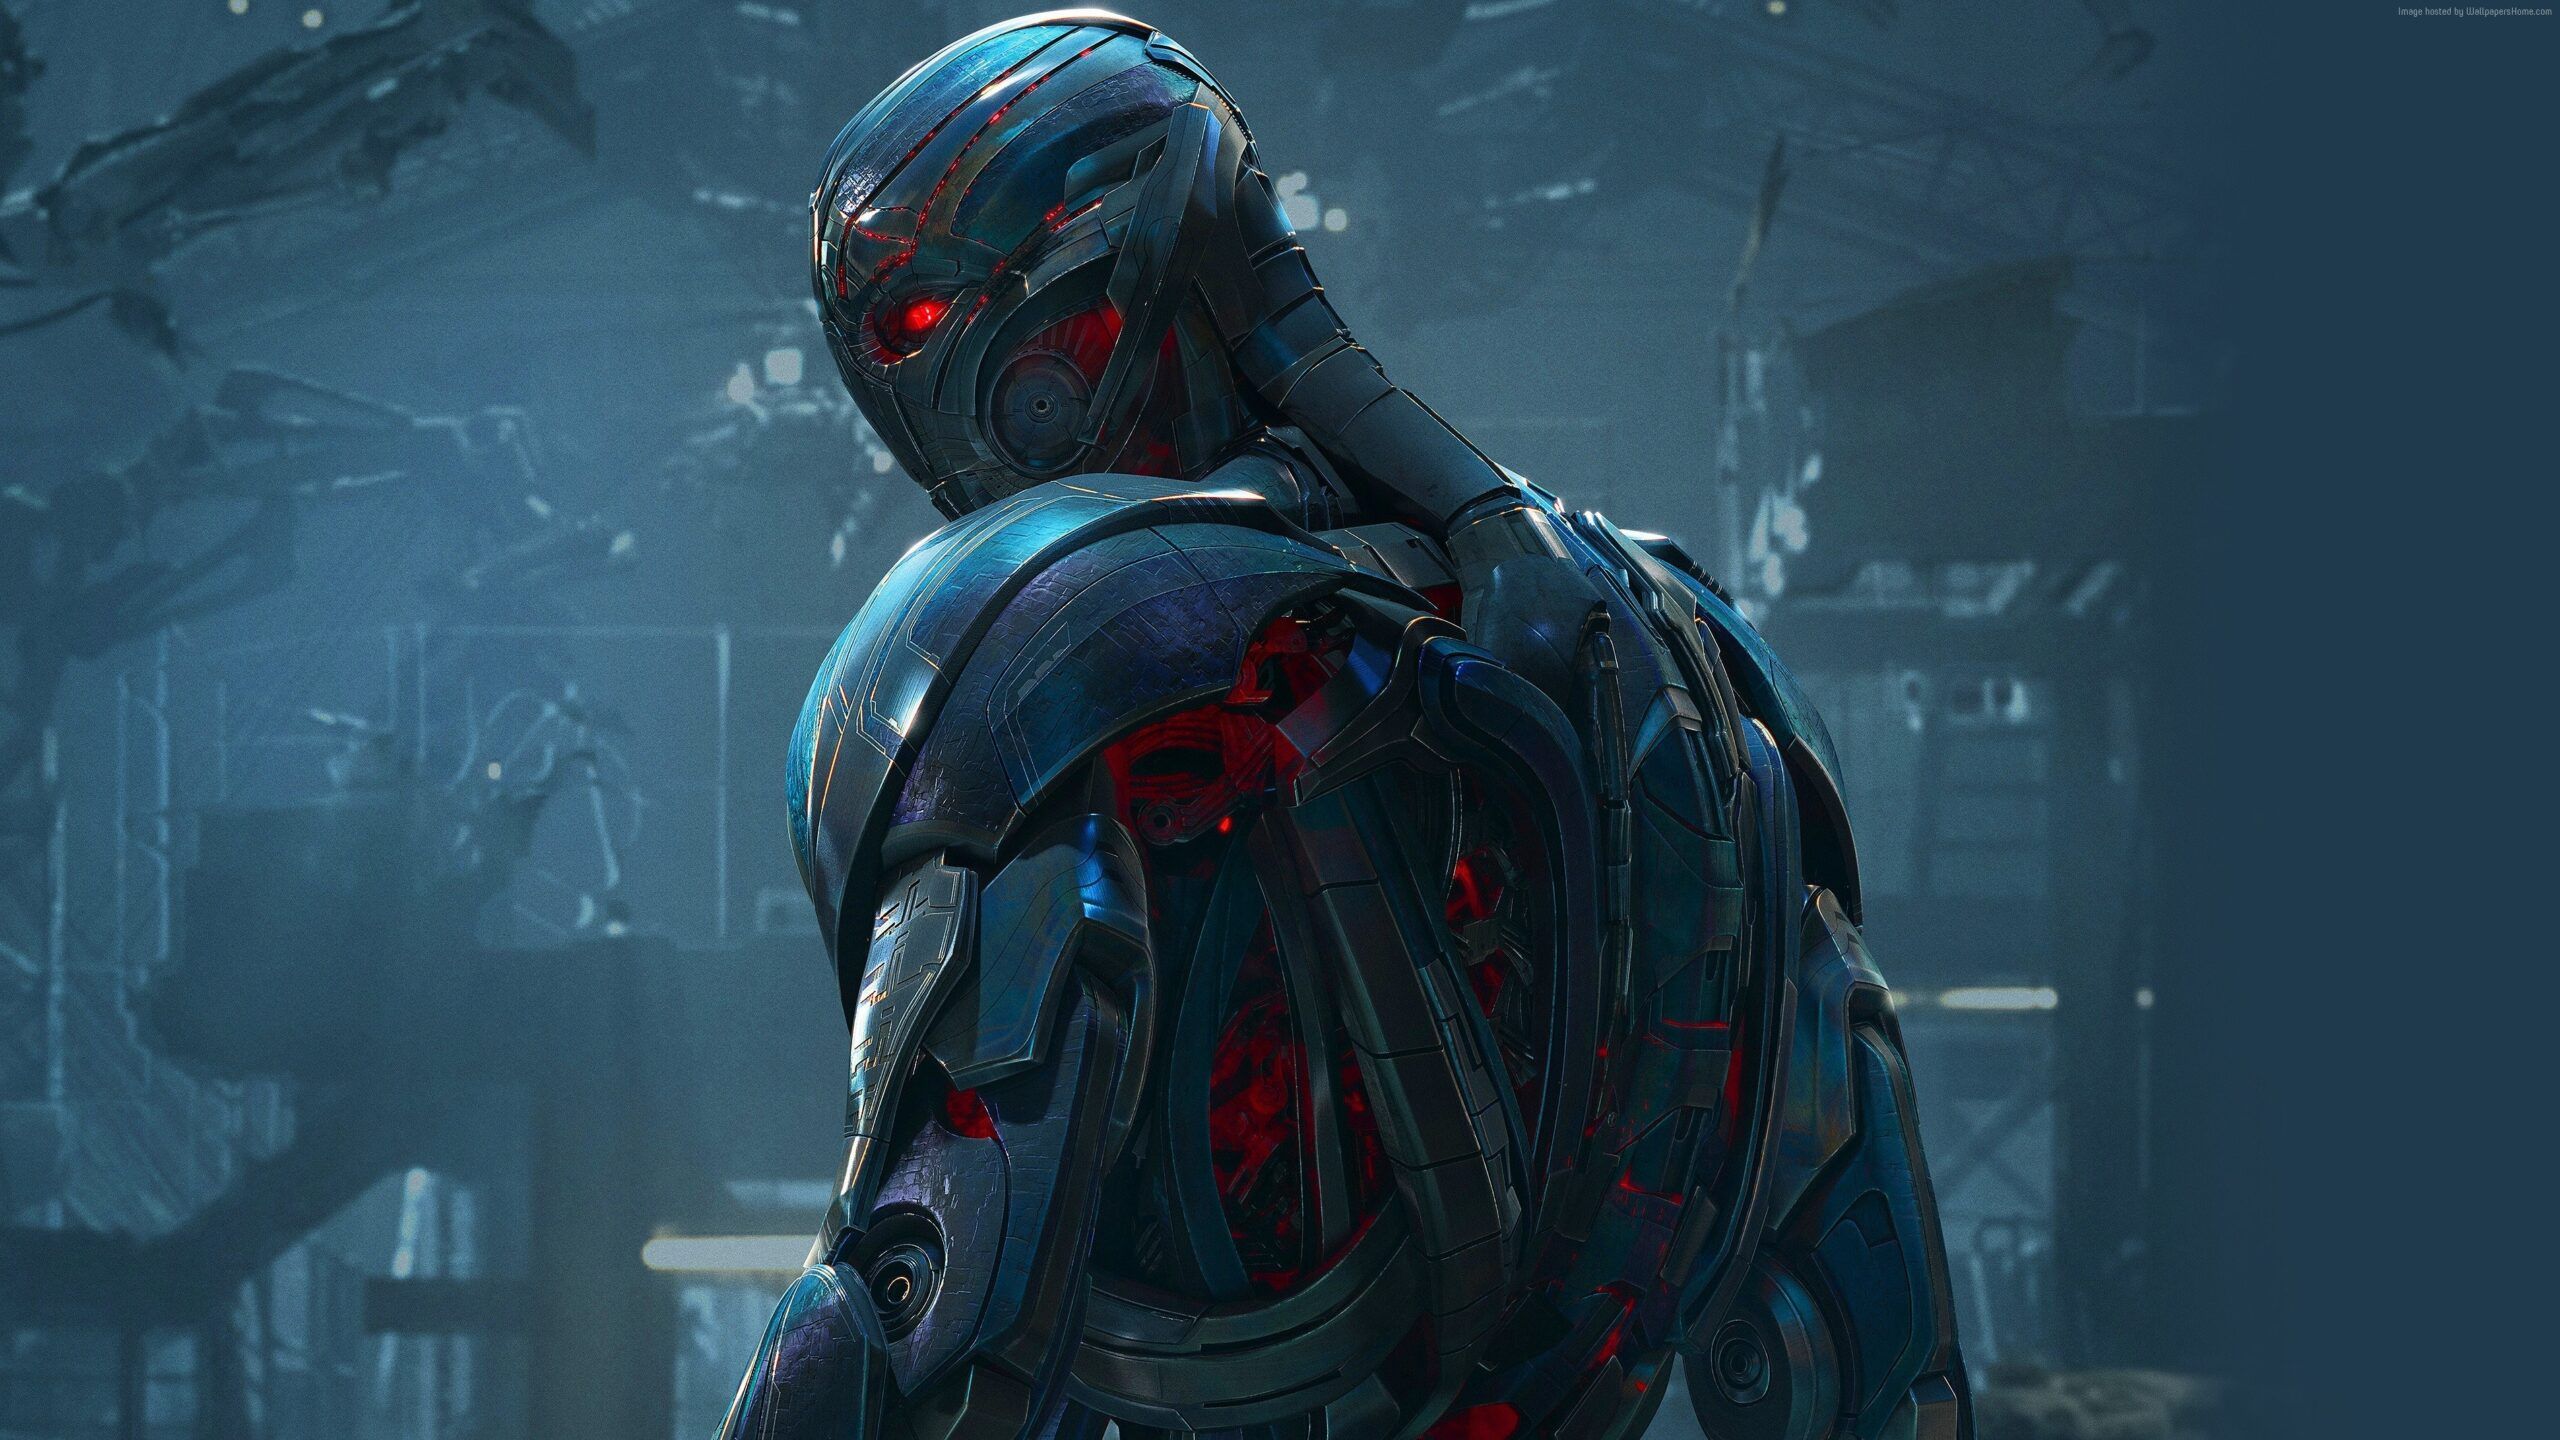 Mobile Wallpaper, android, Fantasy, Artwork, Age, Heroes, avengers, Mobile Wallpaper, Sifi, Cyborg, Ultron, Colourful Download, Free Wallpaper, Comics, Armor, Of, Warrior, Robot, Ultron, Movies. Full HD Wallpaper